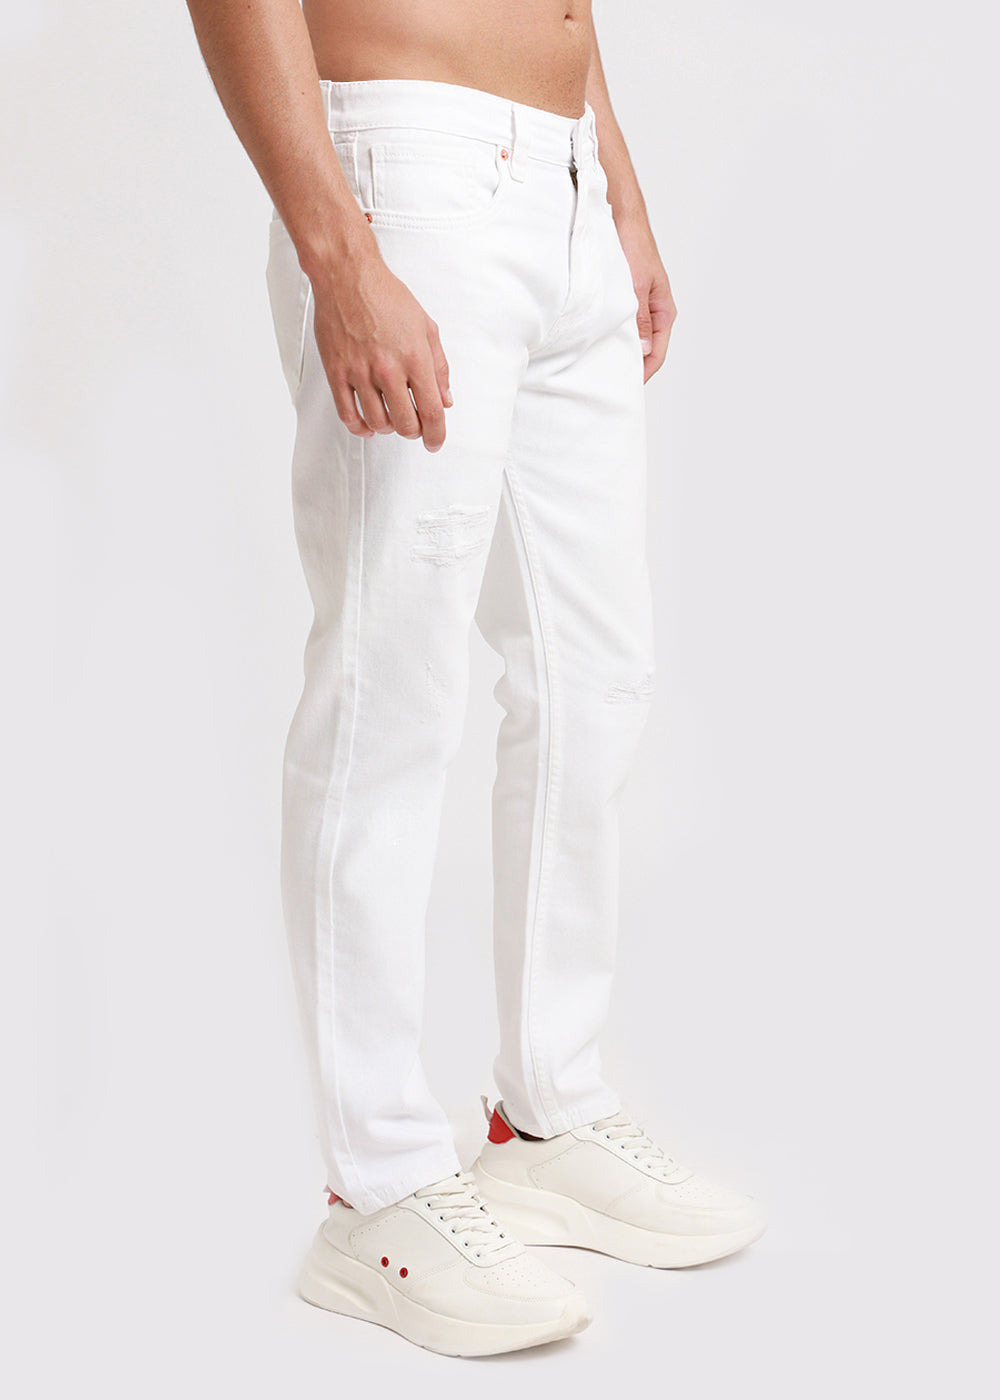 Ribbed White Slim fit Jeans